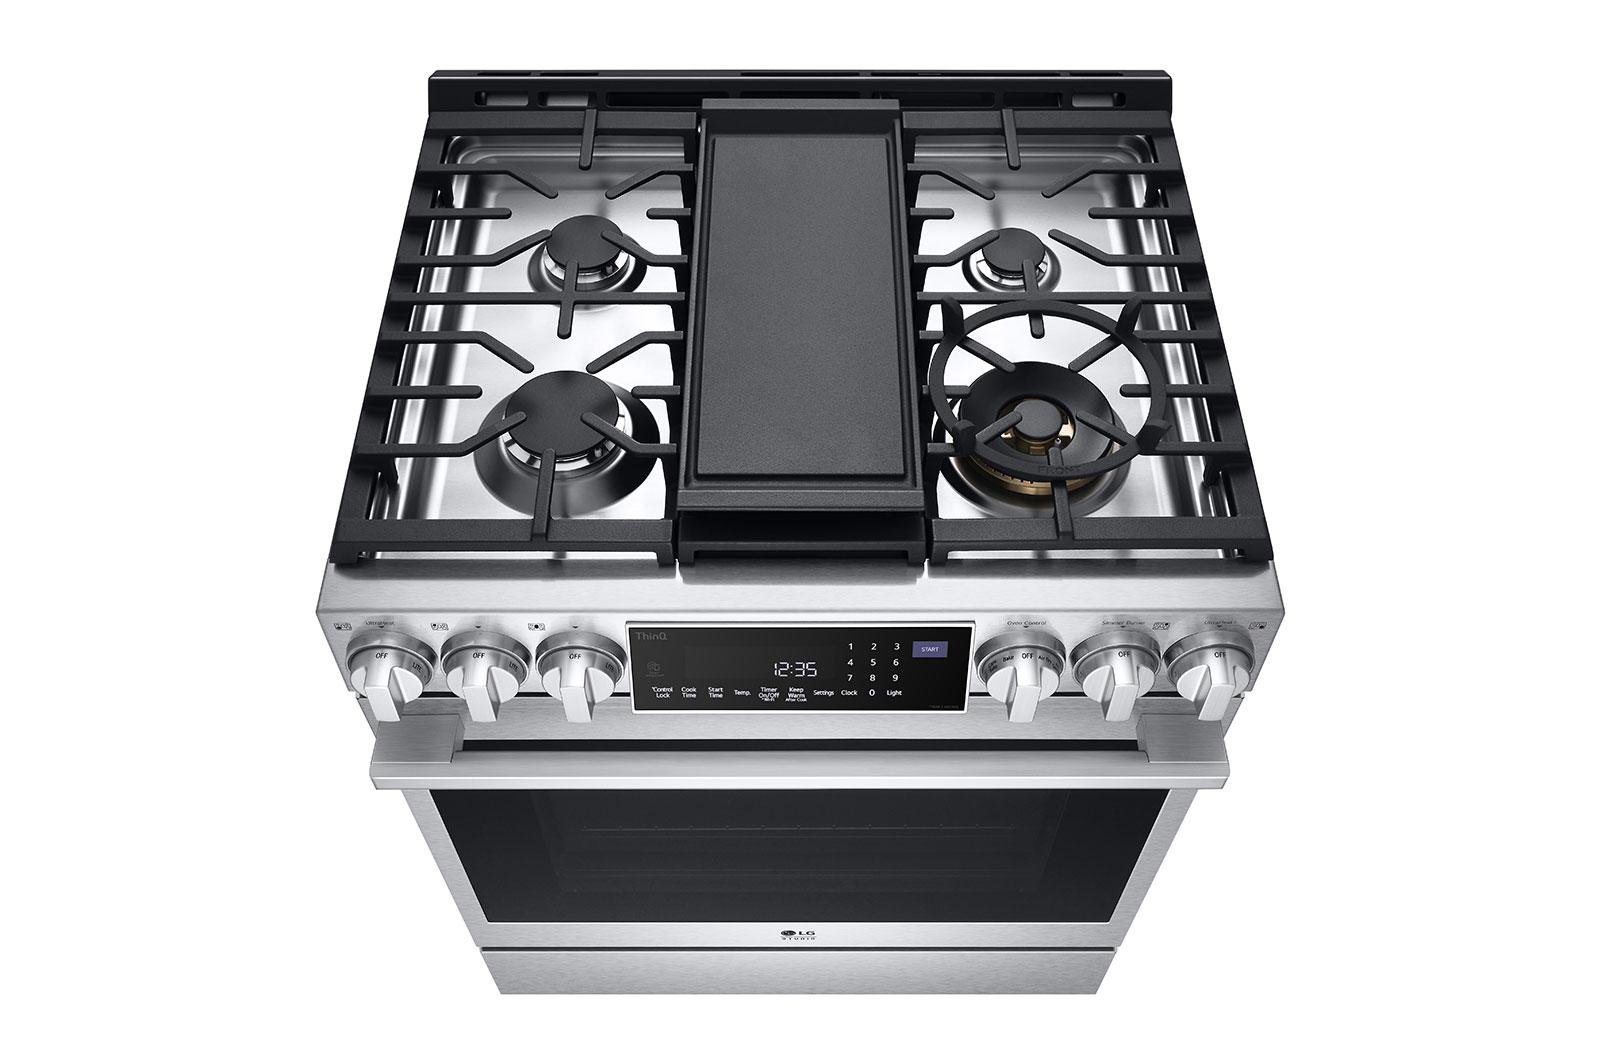 Lg 6.3 cu. ft. Smart wi-fi Dual Fuel Slide-in Range with ProBake Convection® and EasyClean®